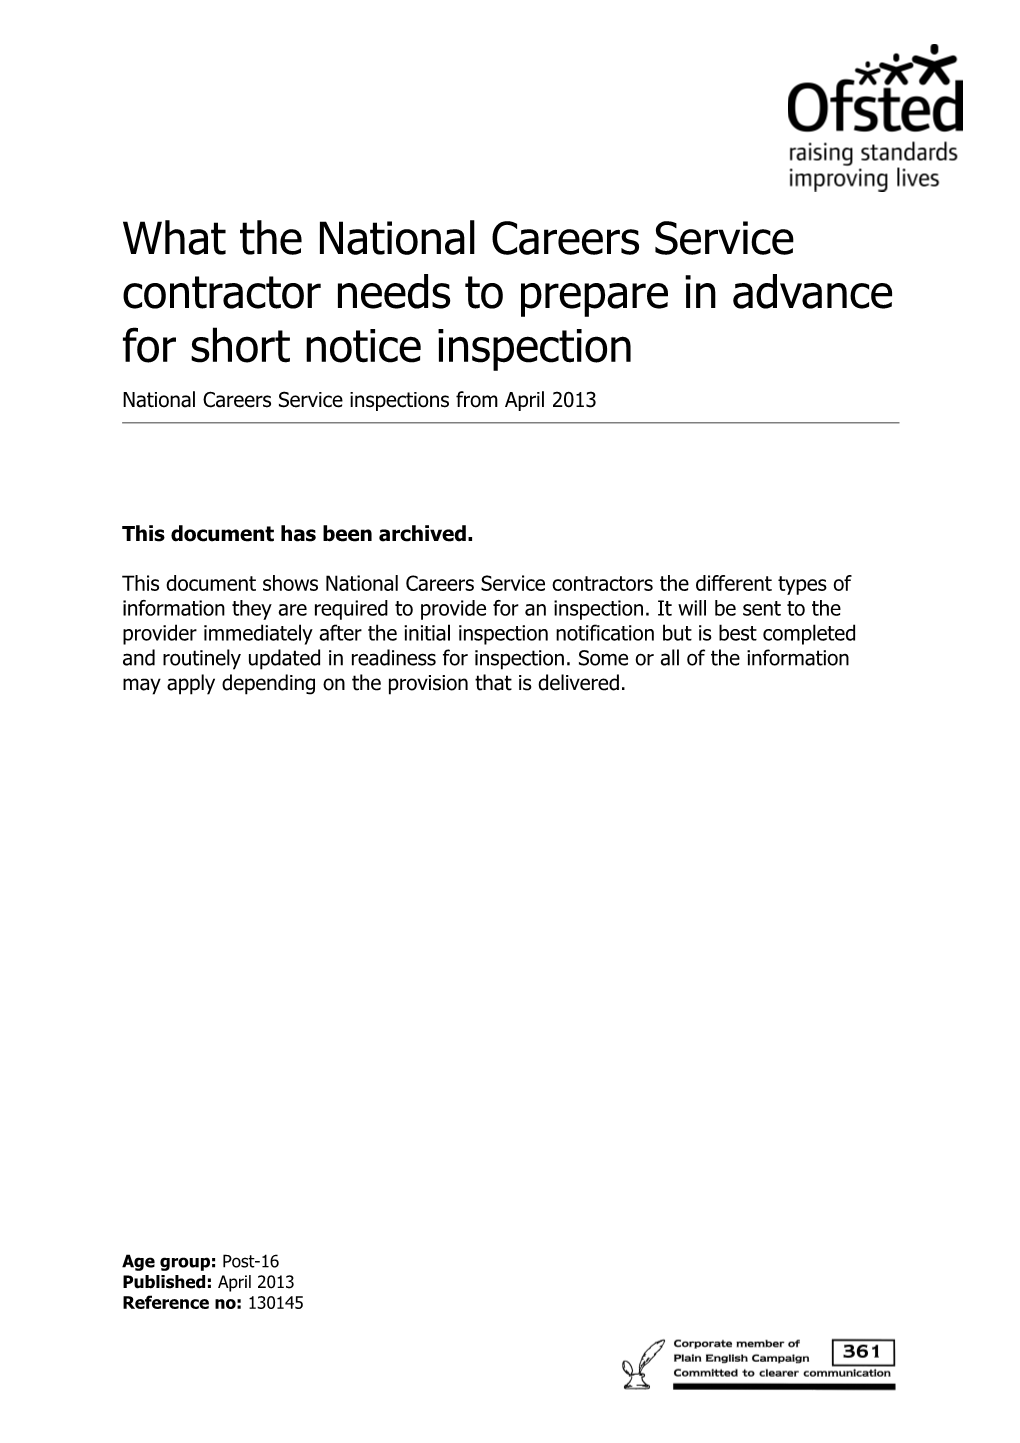 What the National Careers Service Contractor Needs to Prepare in Advance for Short Notice